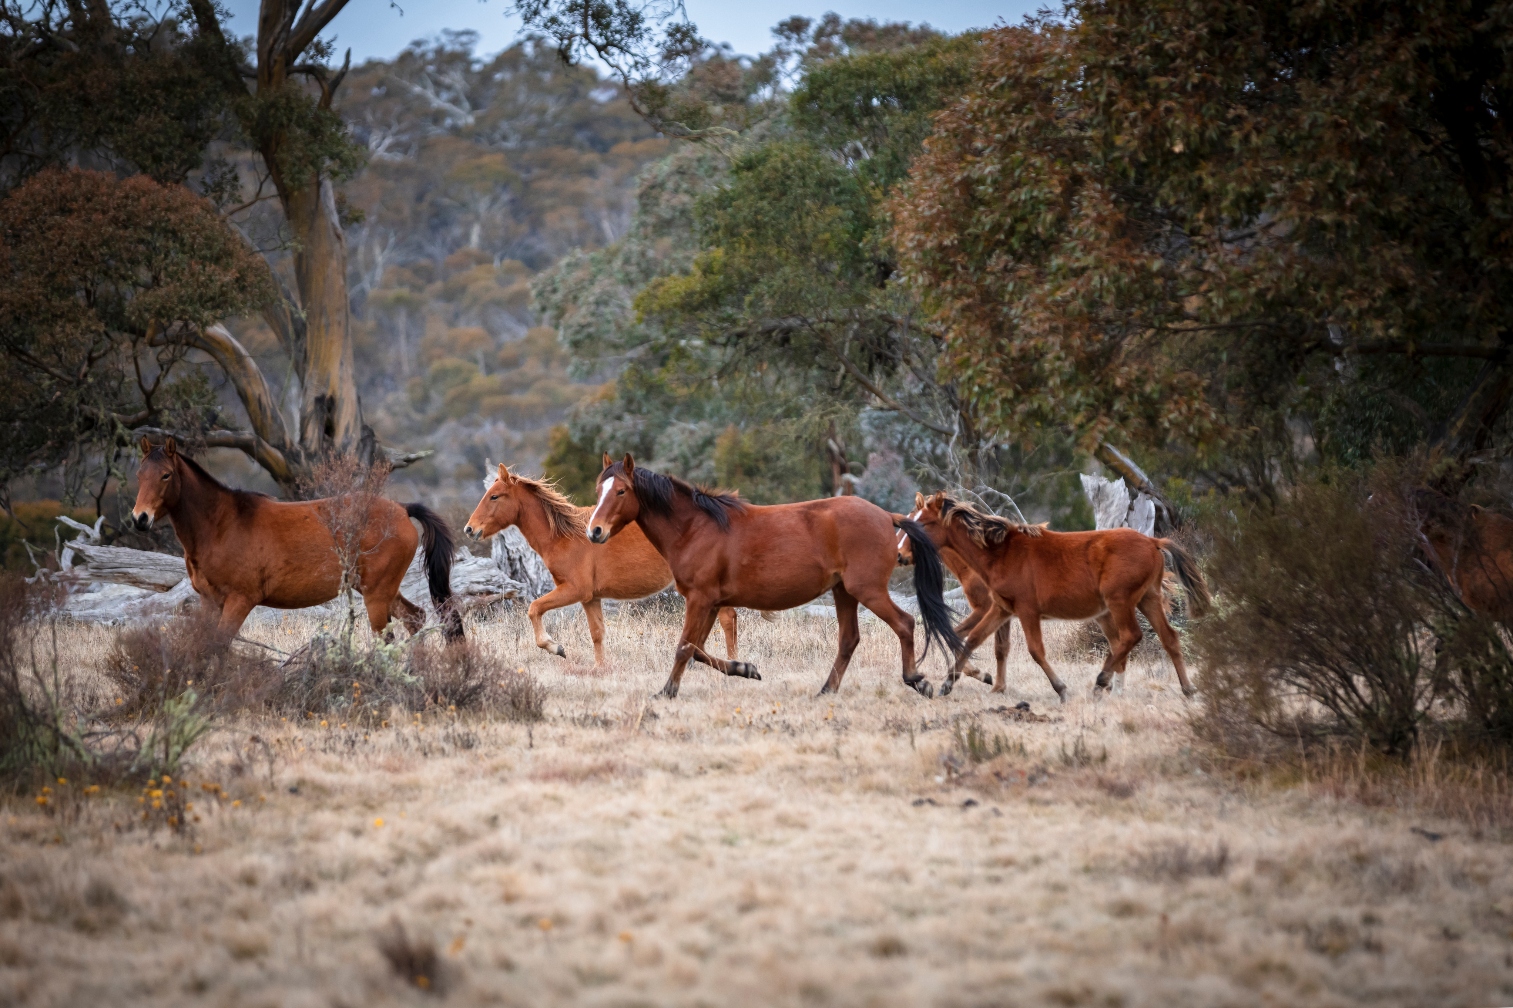 RSPCA missed 500 carcasses at property, inquiry into aerial shooting of Kosciuszko wild horses hears